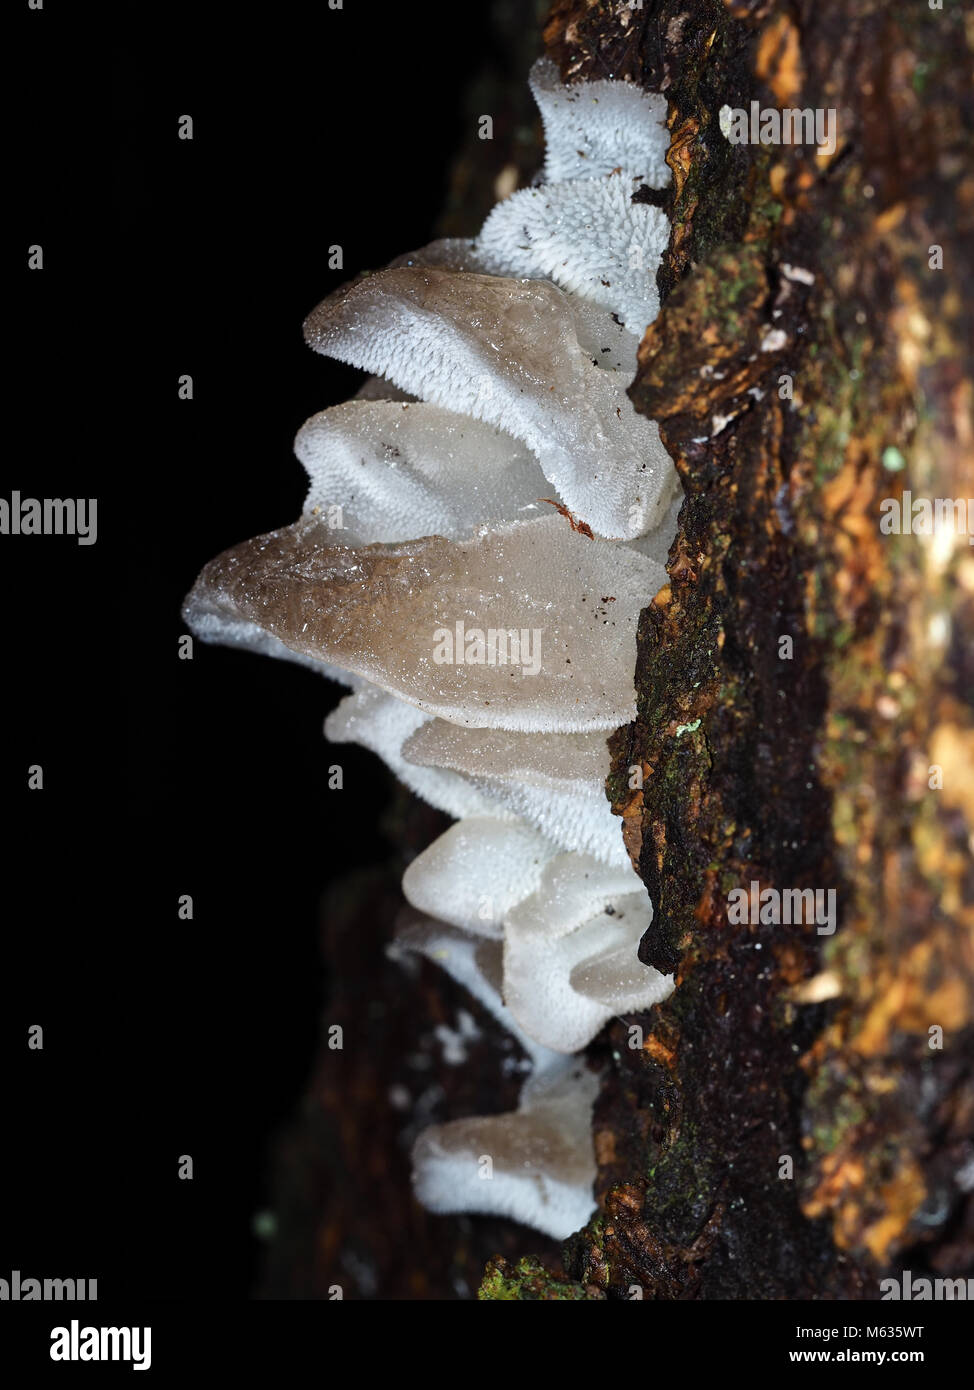 Large cluster of Pseudohydnum gelatinosum (toothed jelly fungus) musrooms growing in a Pacific Northwest forest, side view Stock Photo